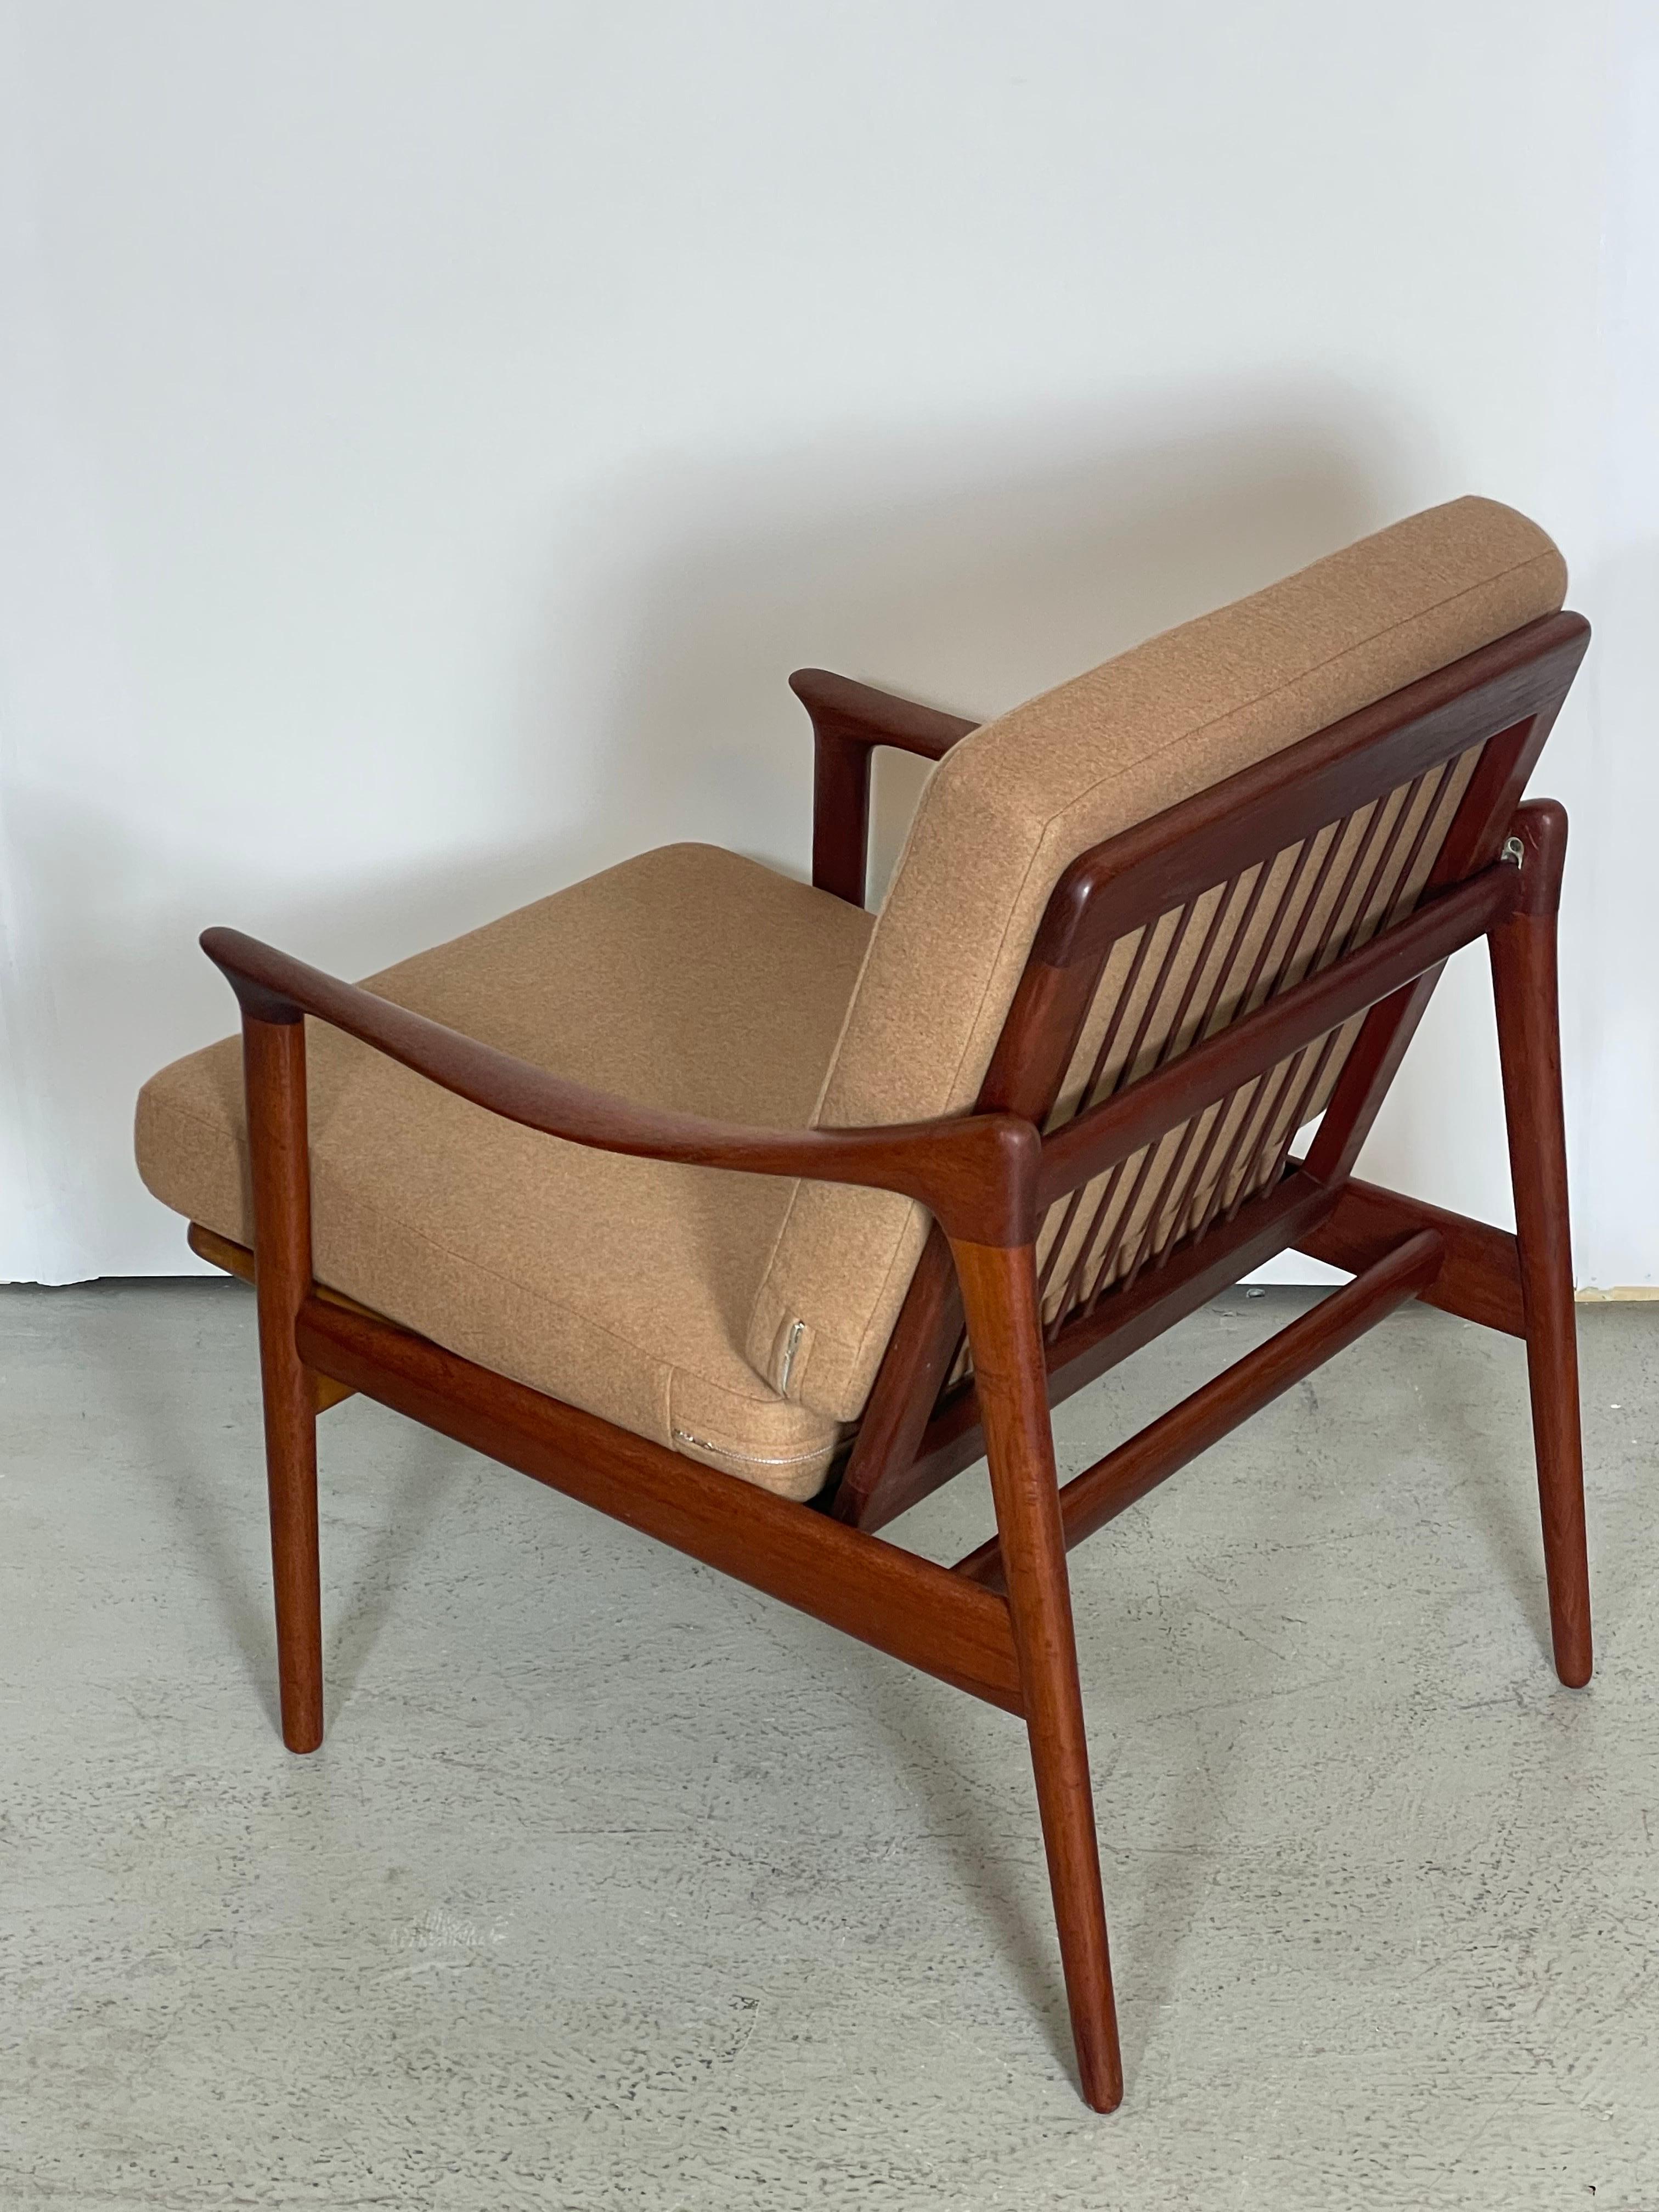 A brilliantly-conceived compact lounge chair in sculpted teak and cognac wool upholstery designed by Norwegian industrial designer Fredrik A. Kayser, 1950s. This frame features a completely demountable construction, with the two side assemblies